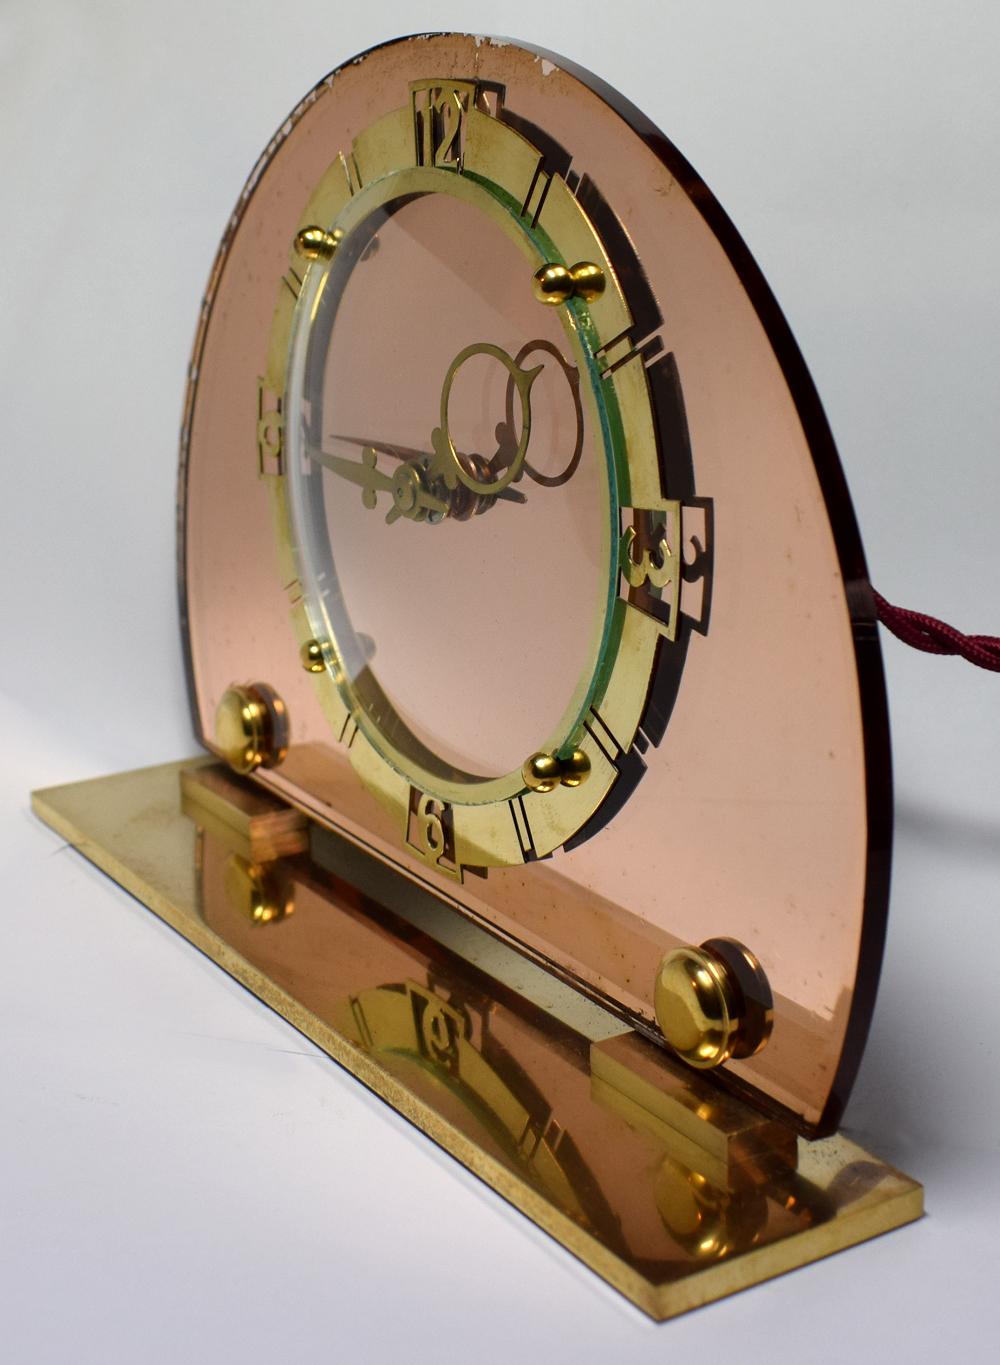 1930s Art Deco English mantel clock by the makers 'Smiths'. Half moon peach mirror glass with fretted out brass numerals contrast beautifully. Runs on electric so no winding needed and is in good working order. There is some age related foxing to